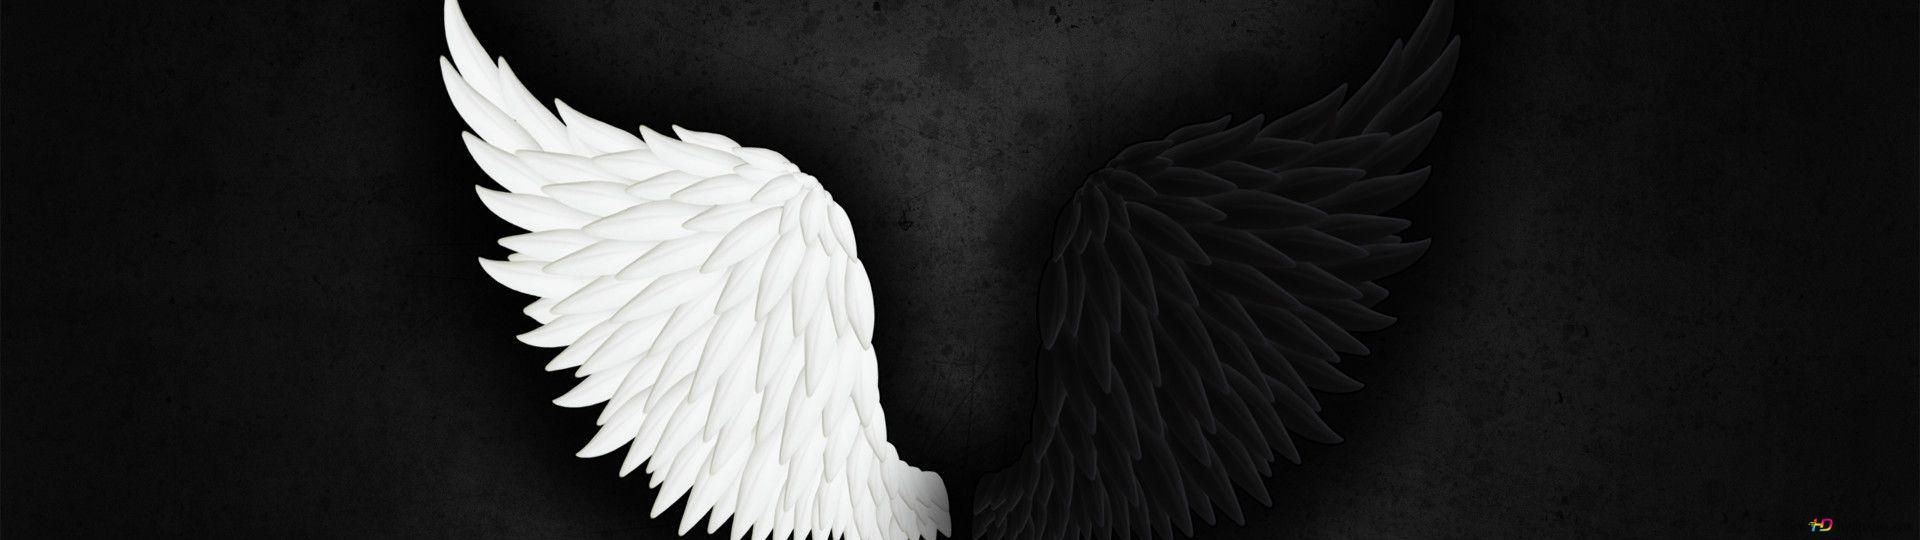 A pair of paper wings, one white and one black, against a black background. - Wings